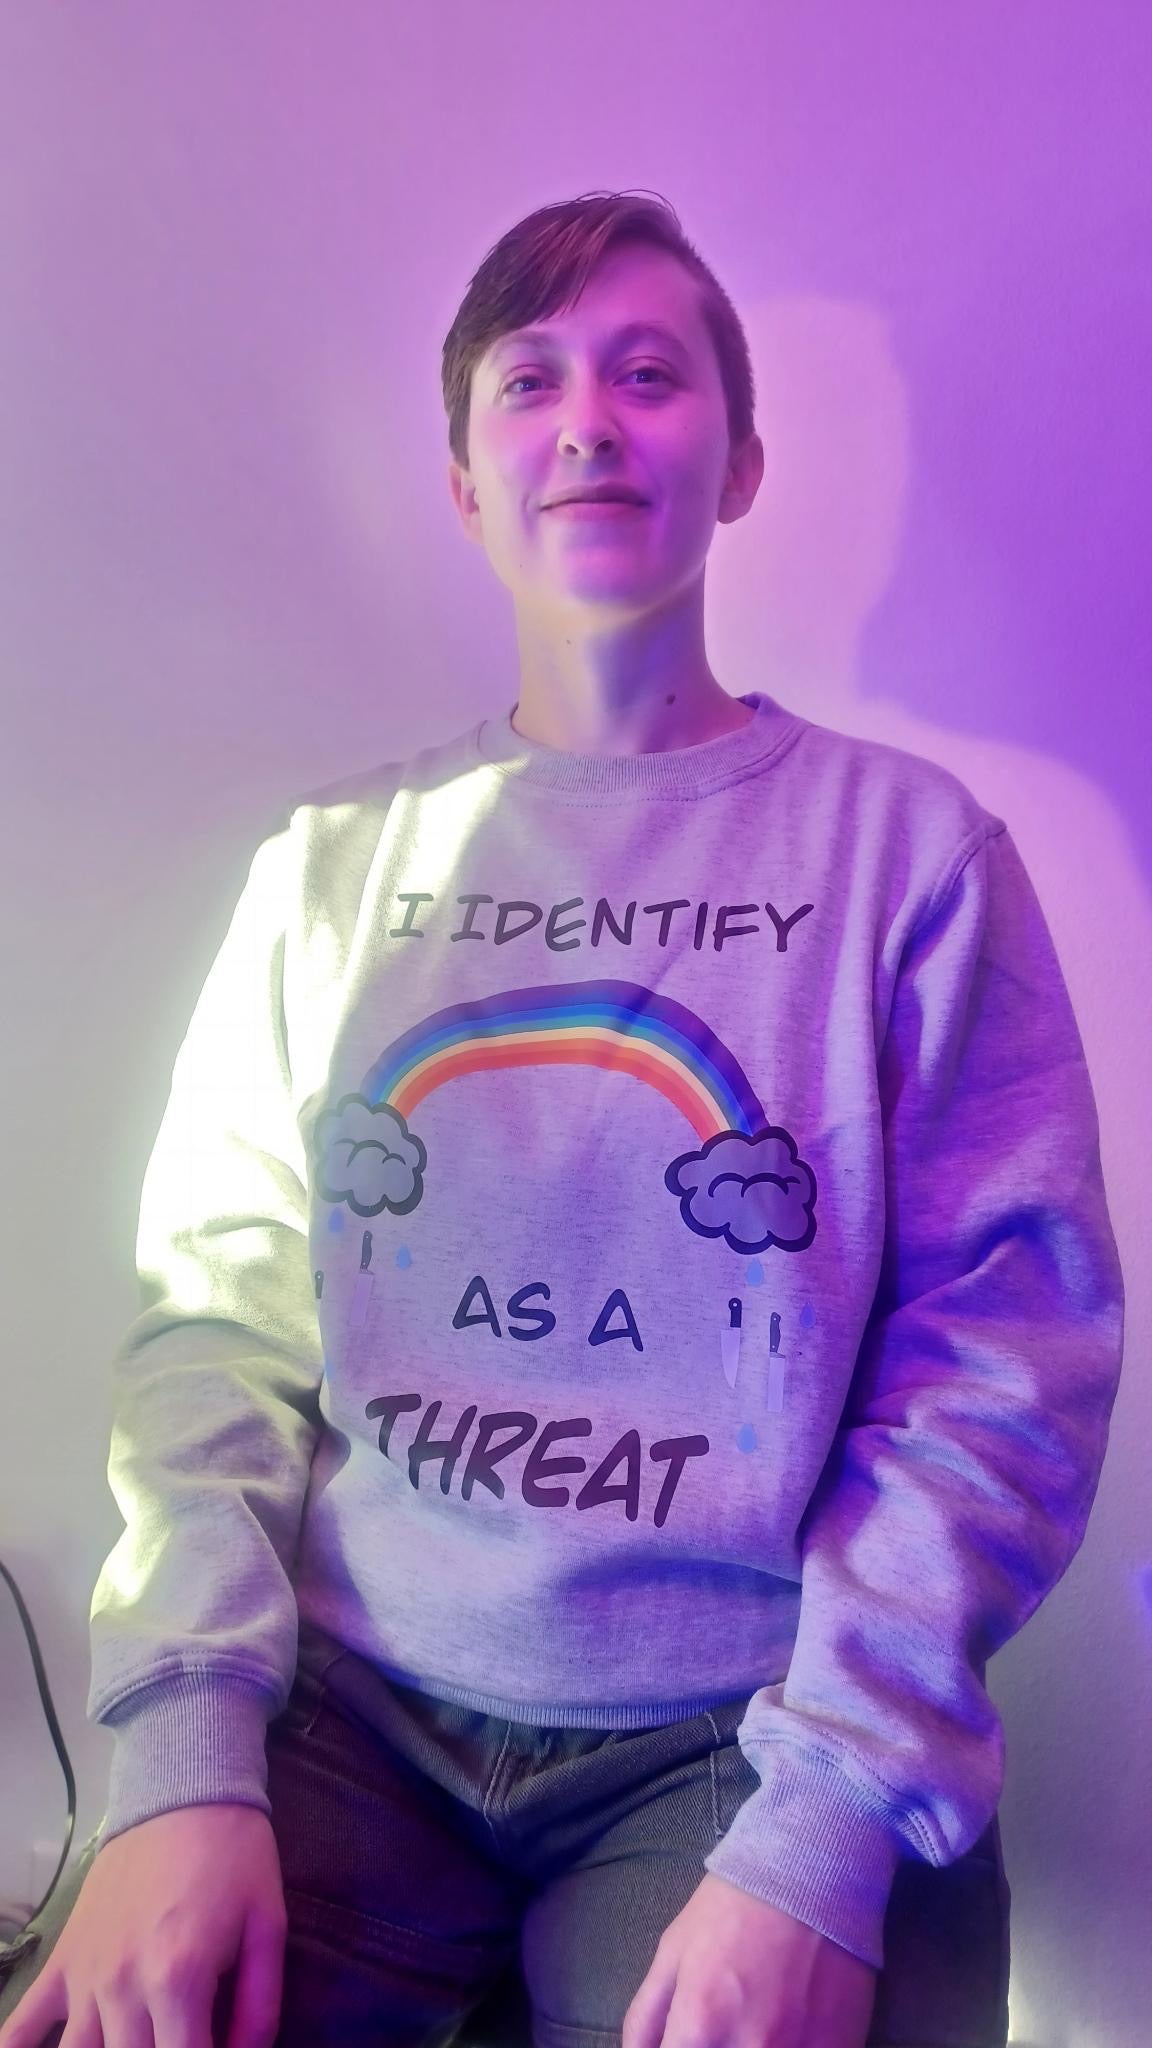 KC wearing a jersey gray crewneck sweater with the words "I identify as a threat" with a rainbow with clouds raining knives